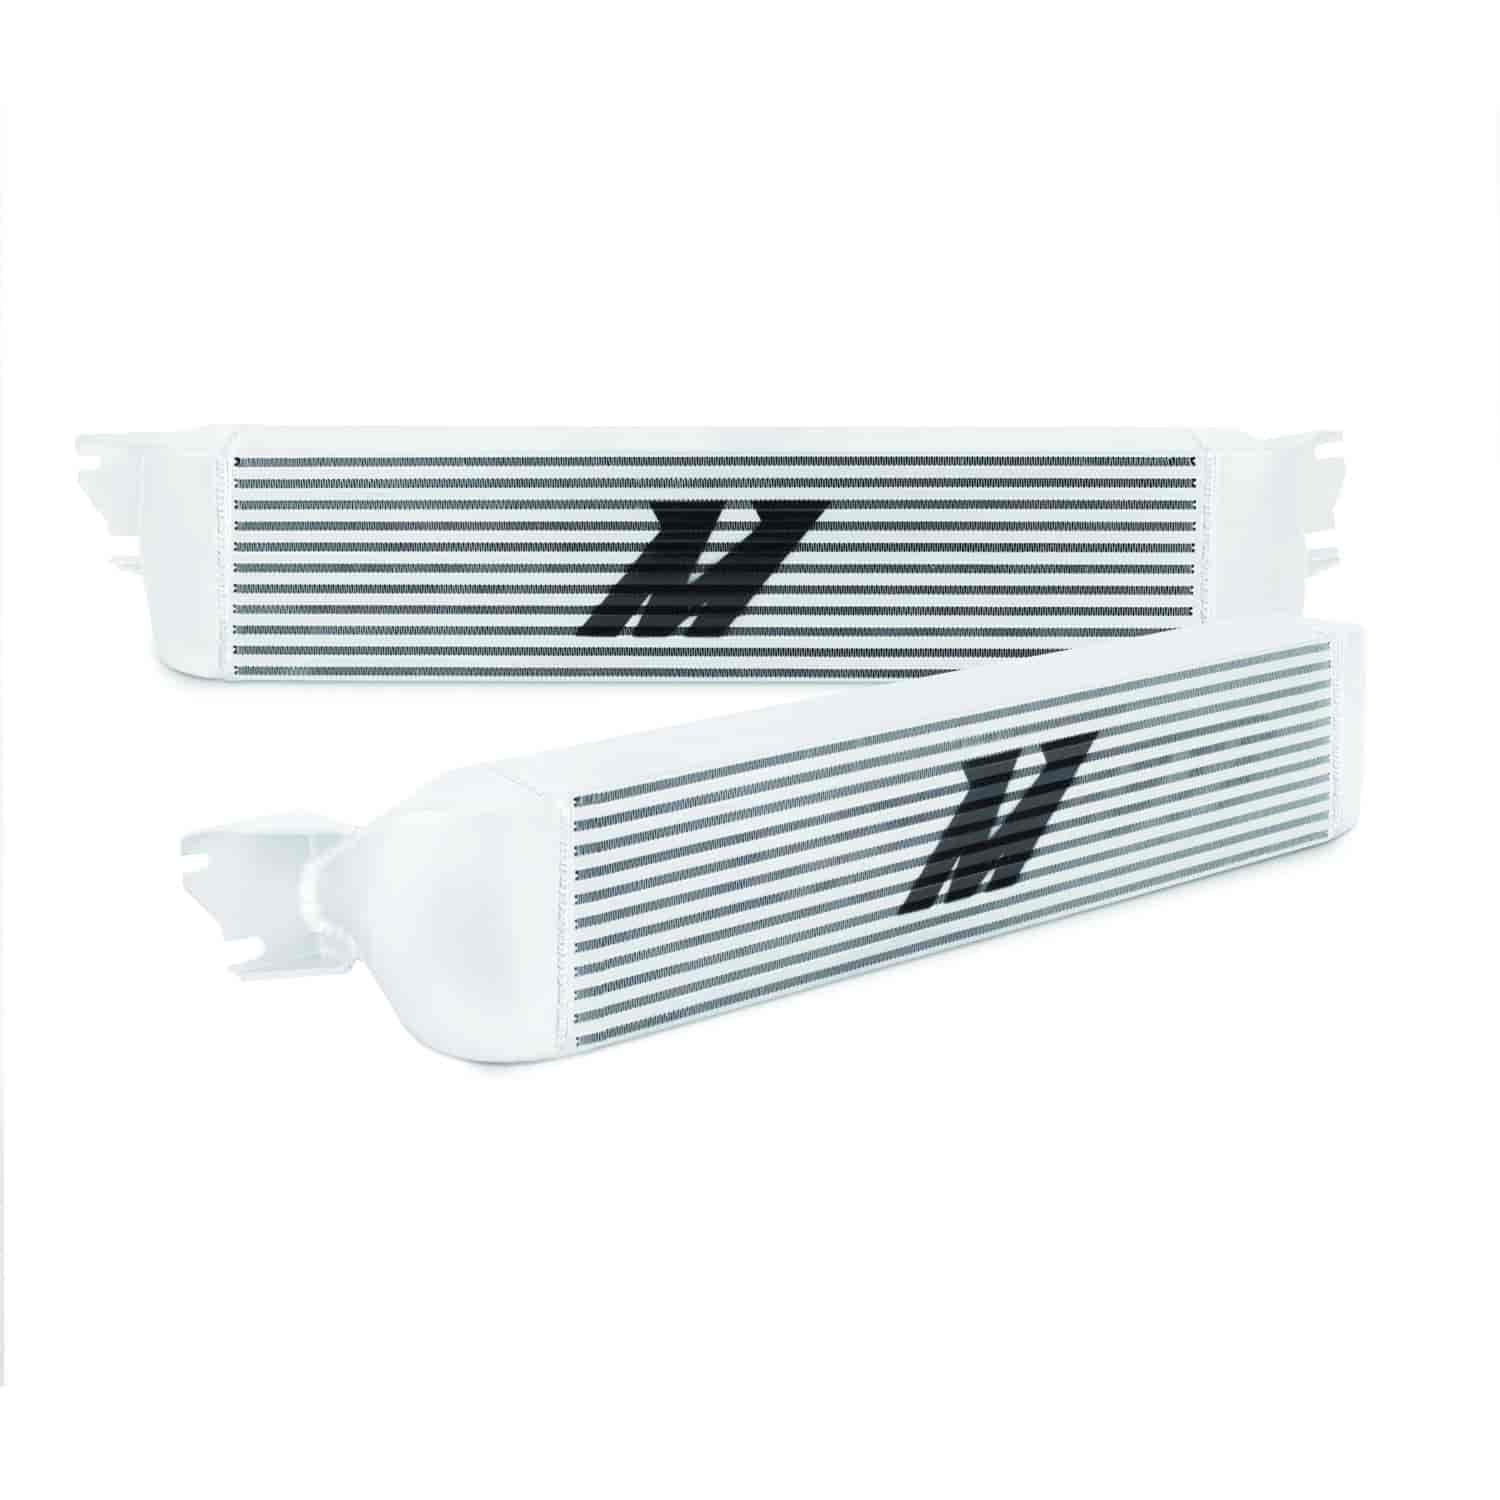 Direct-Fit Performance Intercooler for 2003-2005 Dodge Neon SRT-4 [Silver]